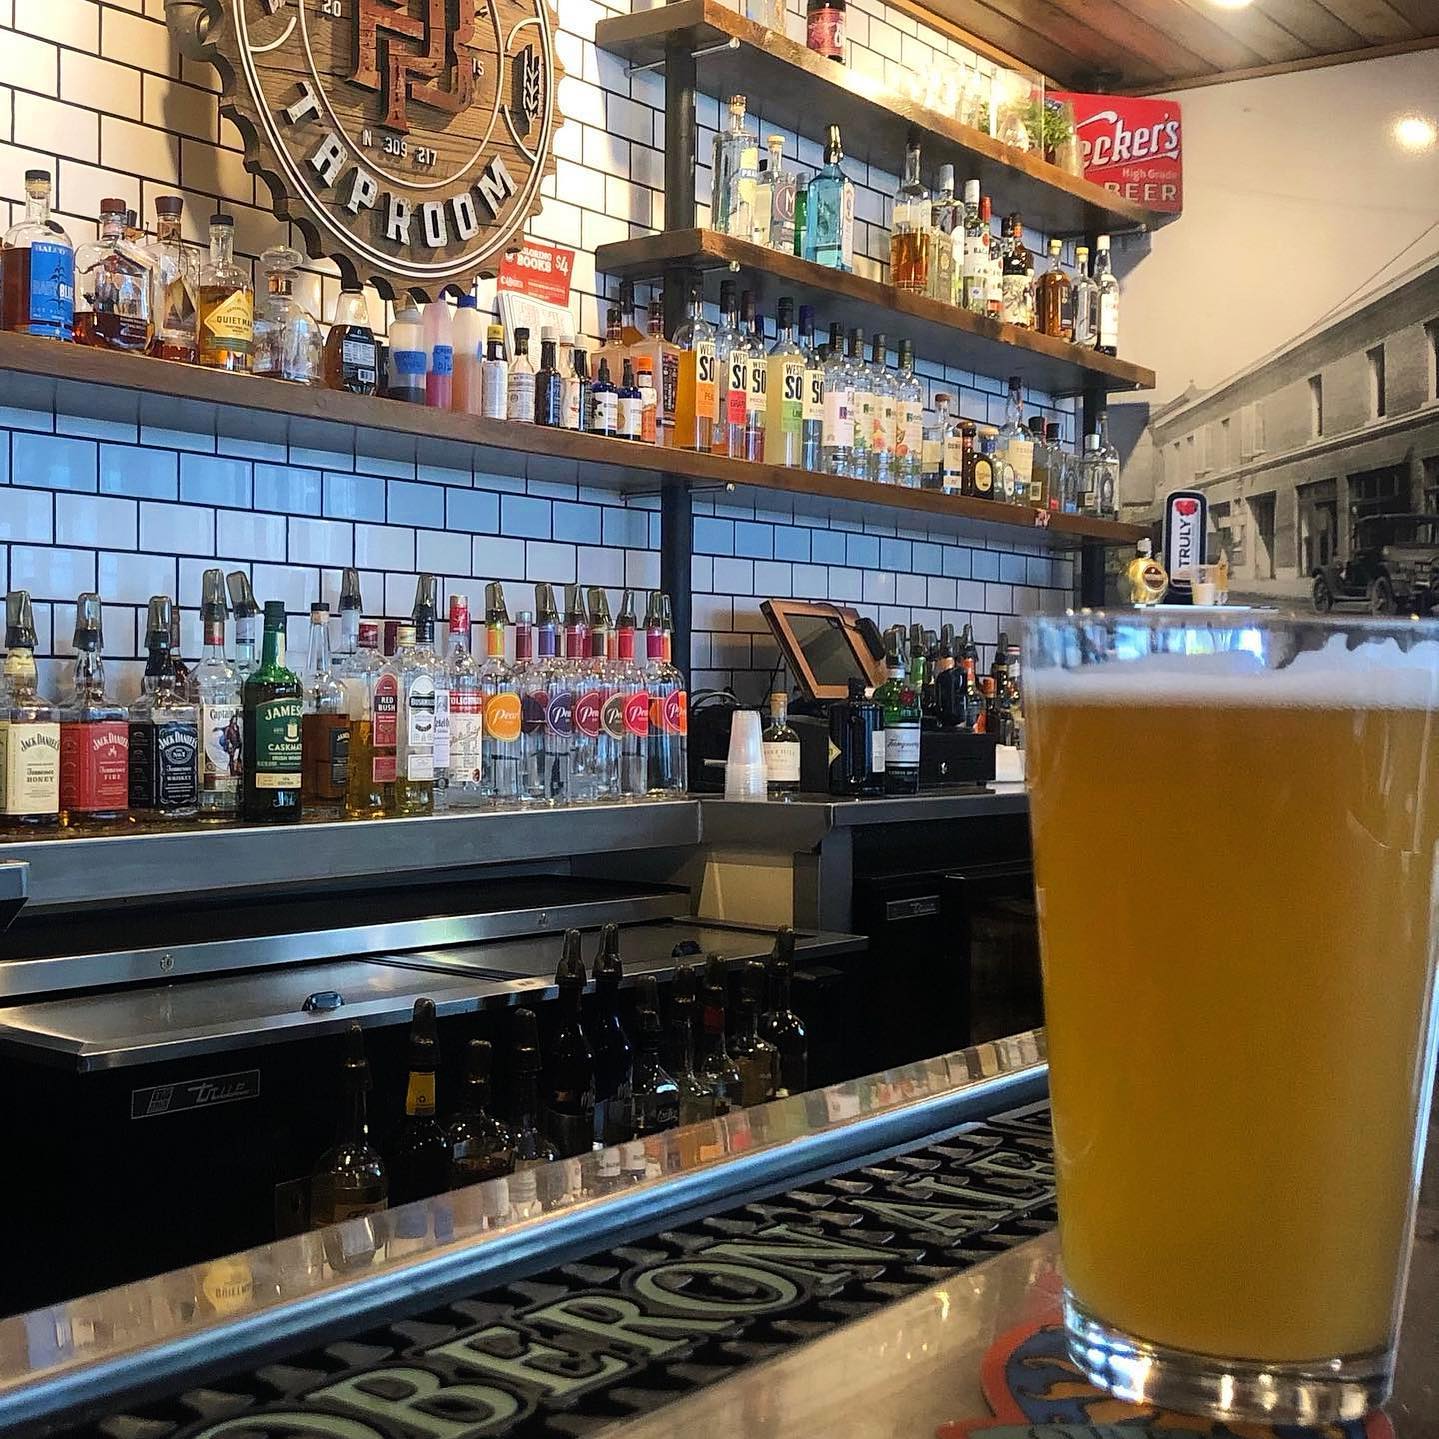 Inside Pour Bros in Downtown Champaign, a draft beer is in a glass on the bar. Photo from Pour Brosâ€™s Facebook page.